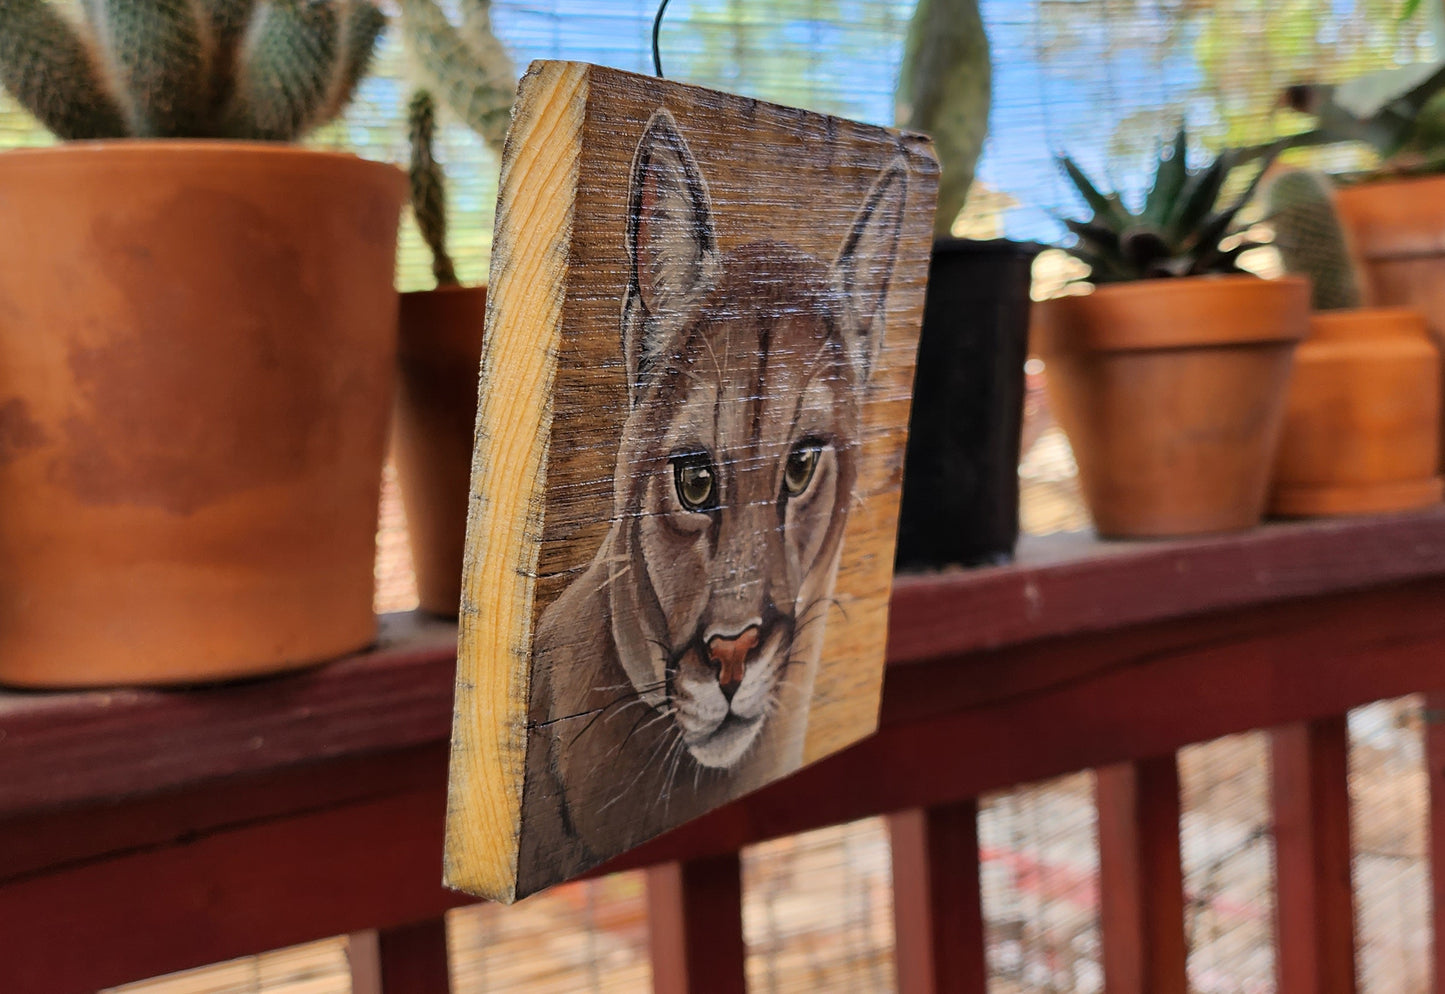 Cougar Acrylic Painting on Reclaimed Wood, Sonoran Desert, Southwestern Art, Catamount, Panther, Puma, Mountain Lion